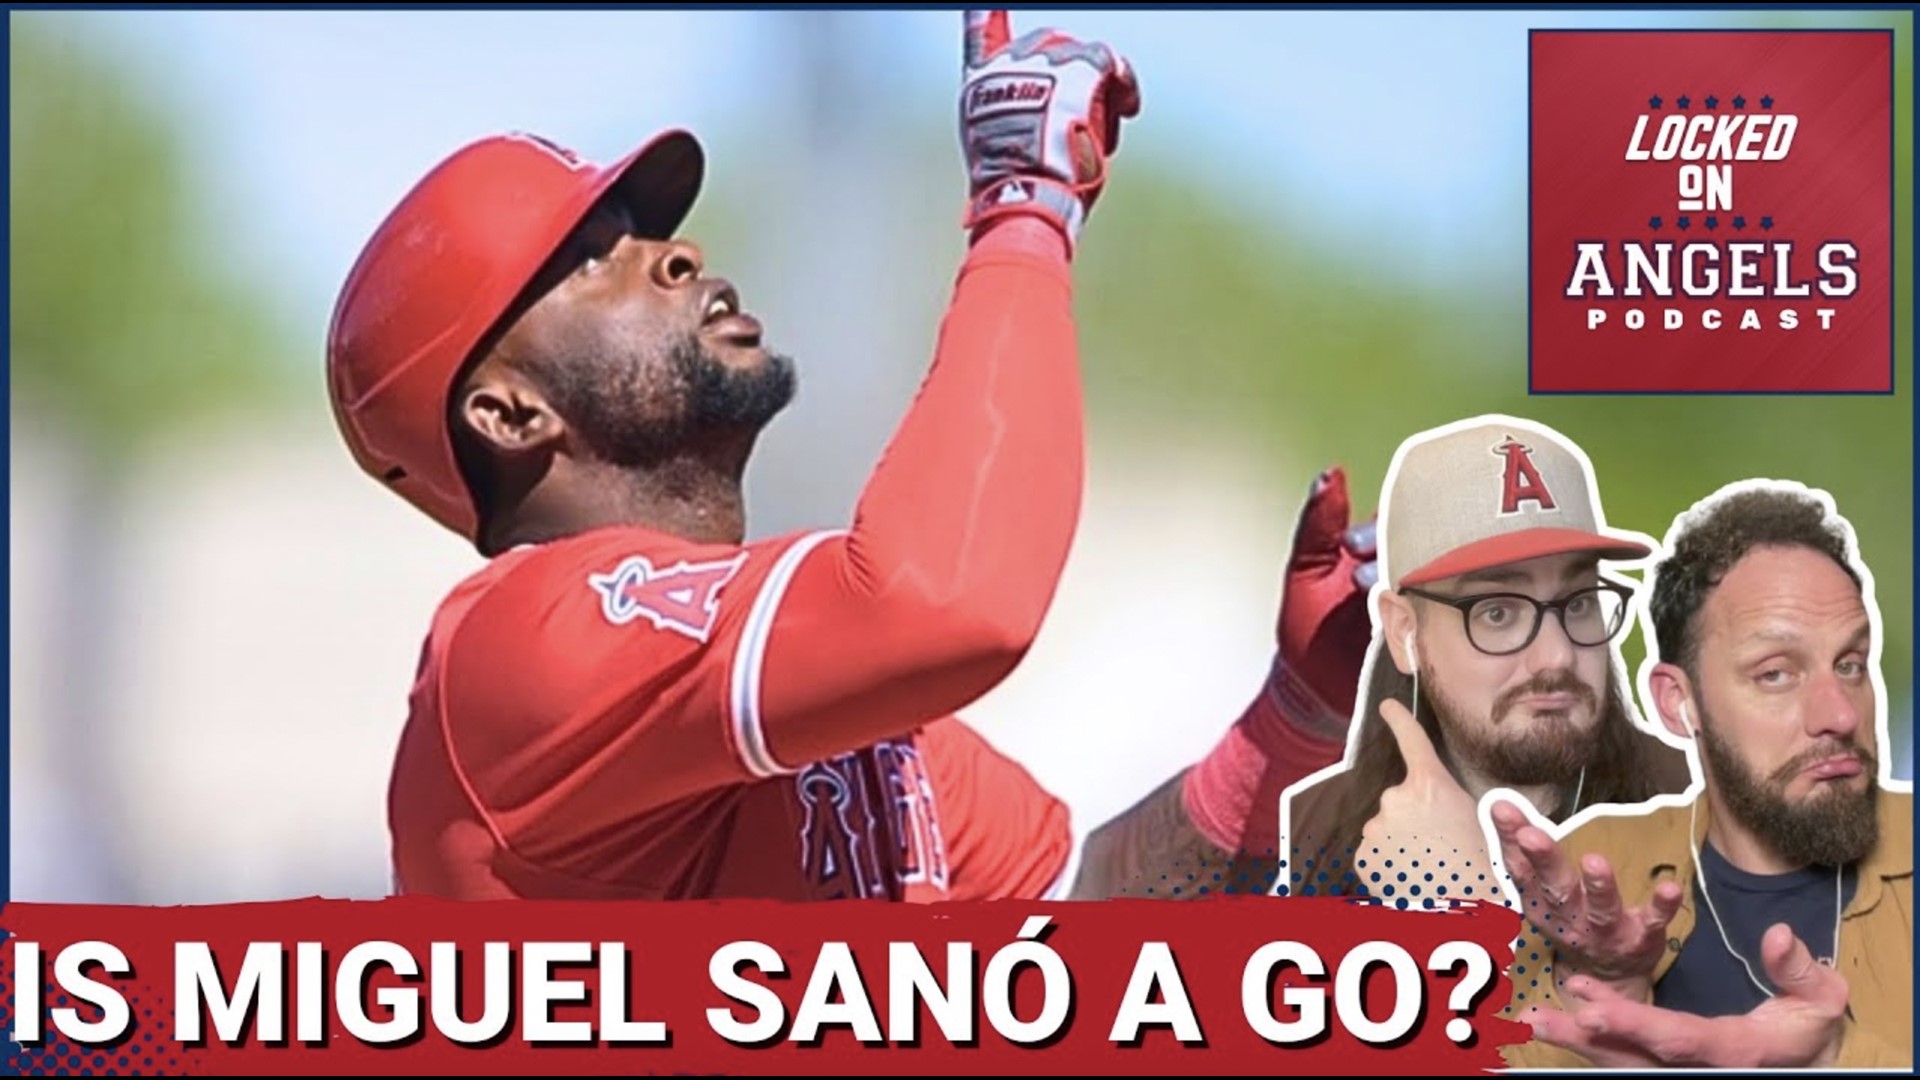 The Los Angeles Angels got back to it against the Royals yesterday and saw a great start from Reid Detmers, while Miguel Sanó homered